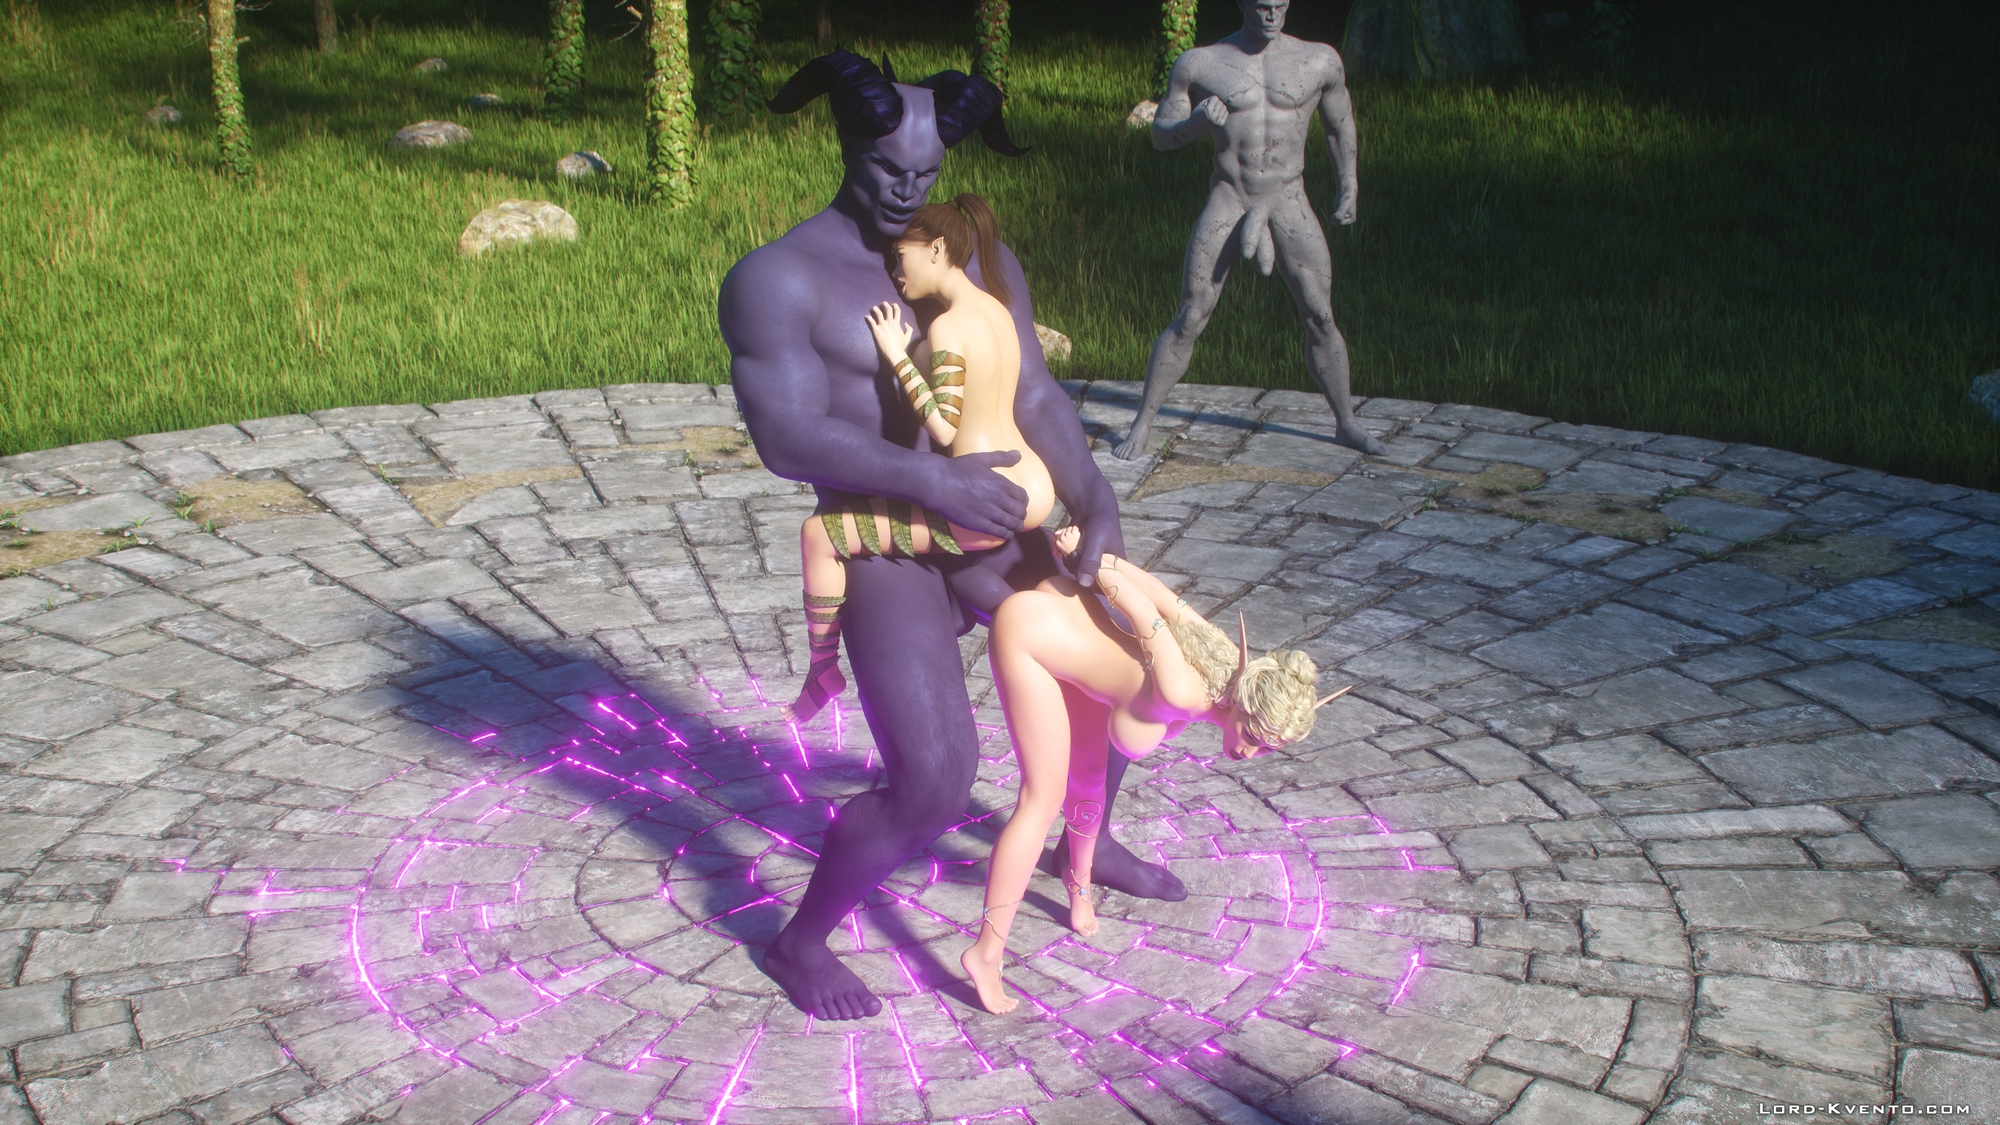 World Of Orgasm - Golem's Awakening  3d Porn Magic Elf Double Penis Horns Threesome Forced Doggy Style Pussy Outdoor Sex Double Penetration Big boobs Cum In Face Cumshot 12